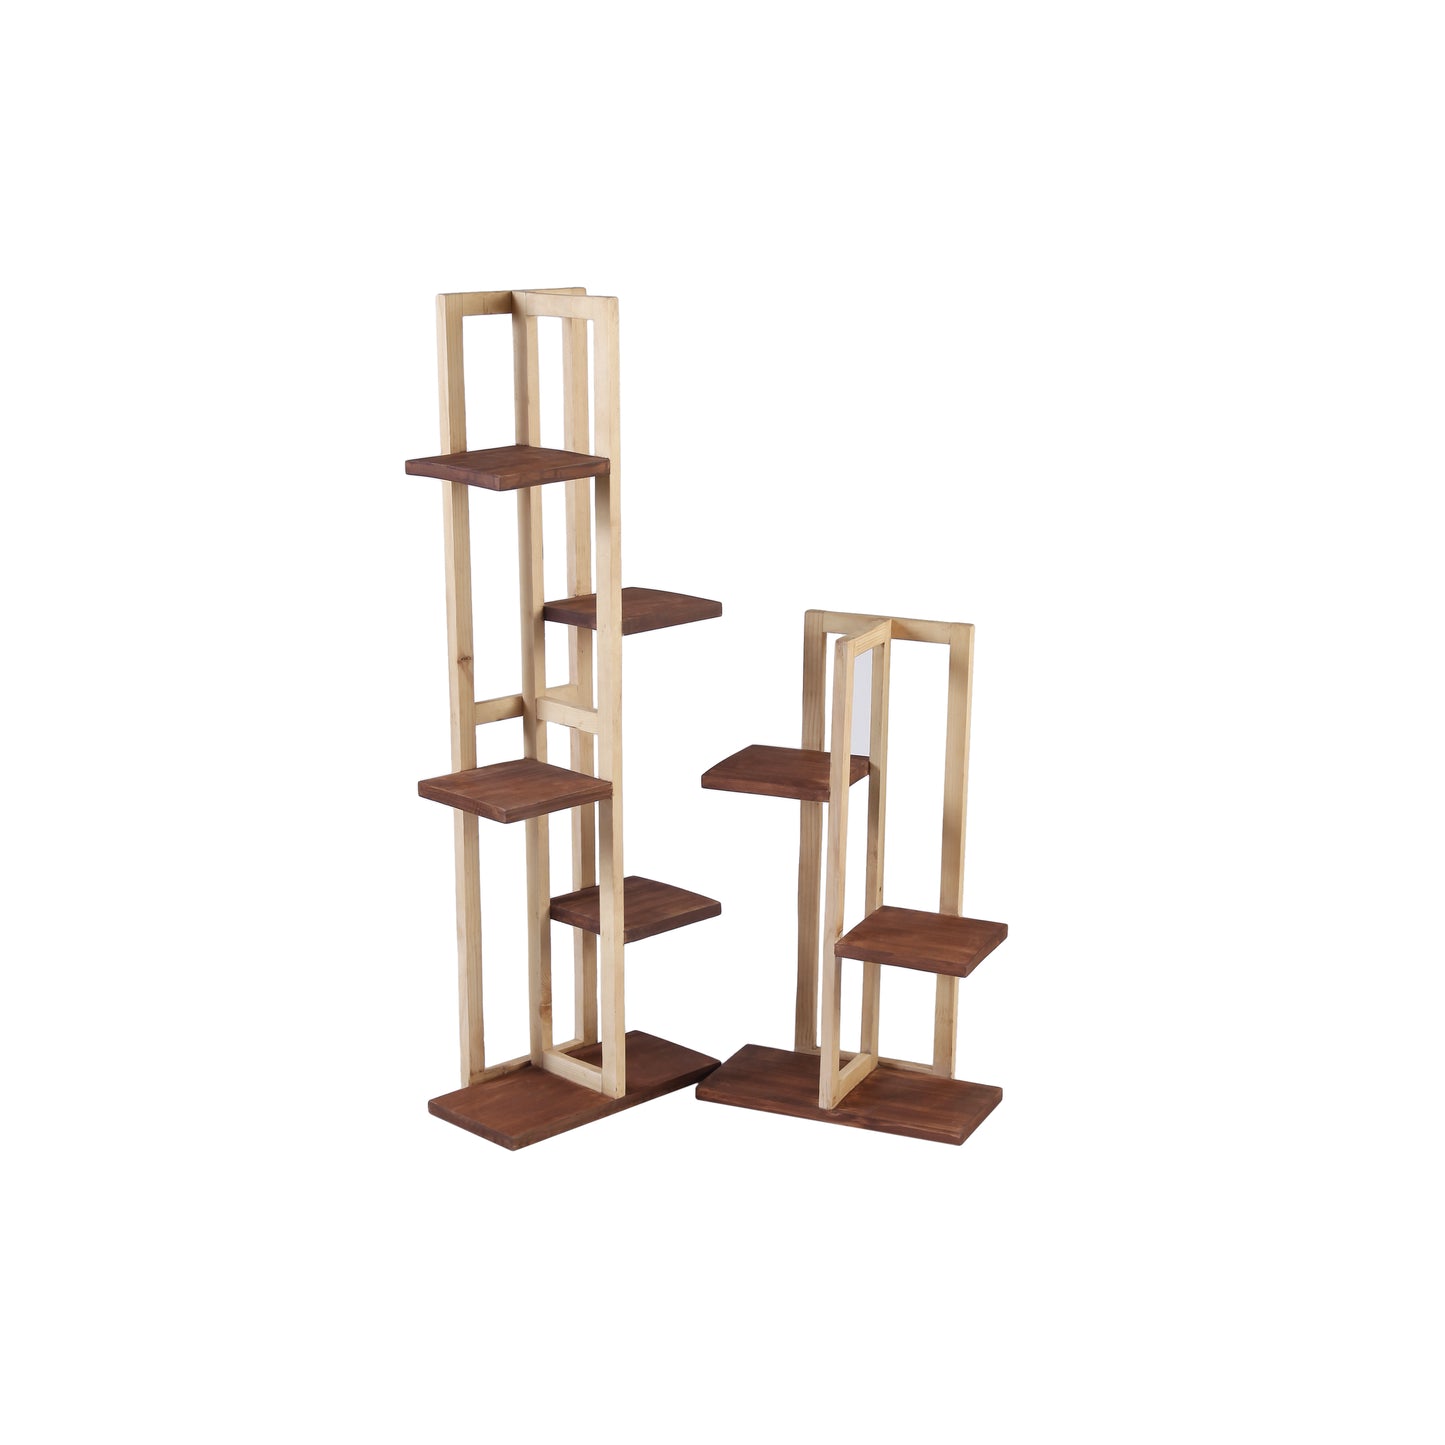 A Tiny Mistake All Purpose Five Tier Stand (One Piece) (For Planters, Ornaments and Accessories) (Natural Pine Wood Stand with Dark Planks)